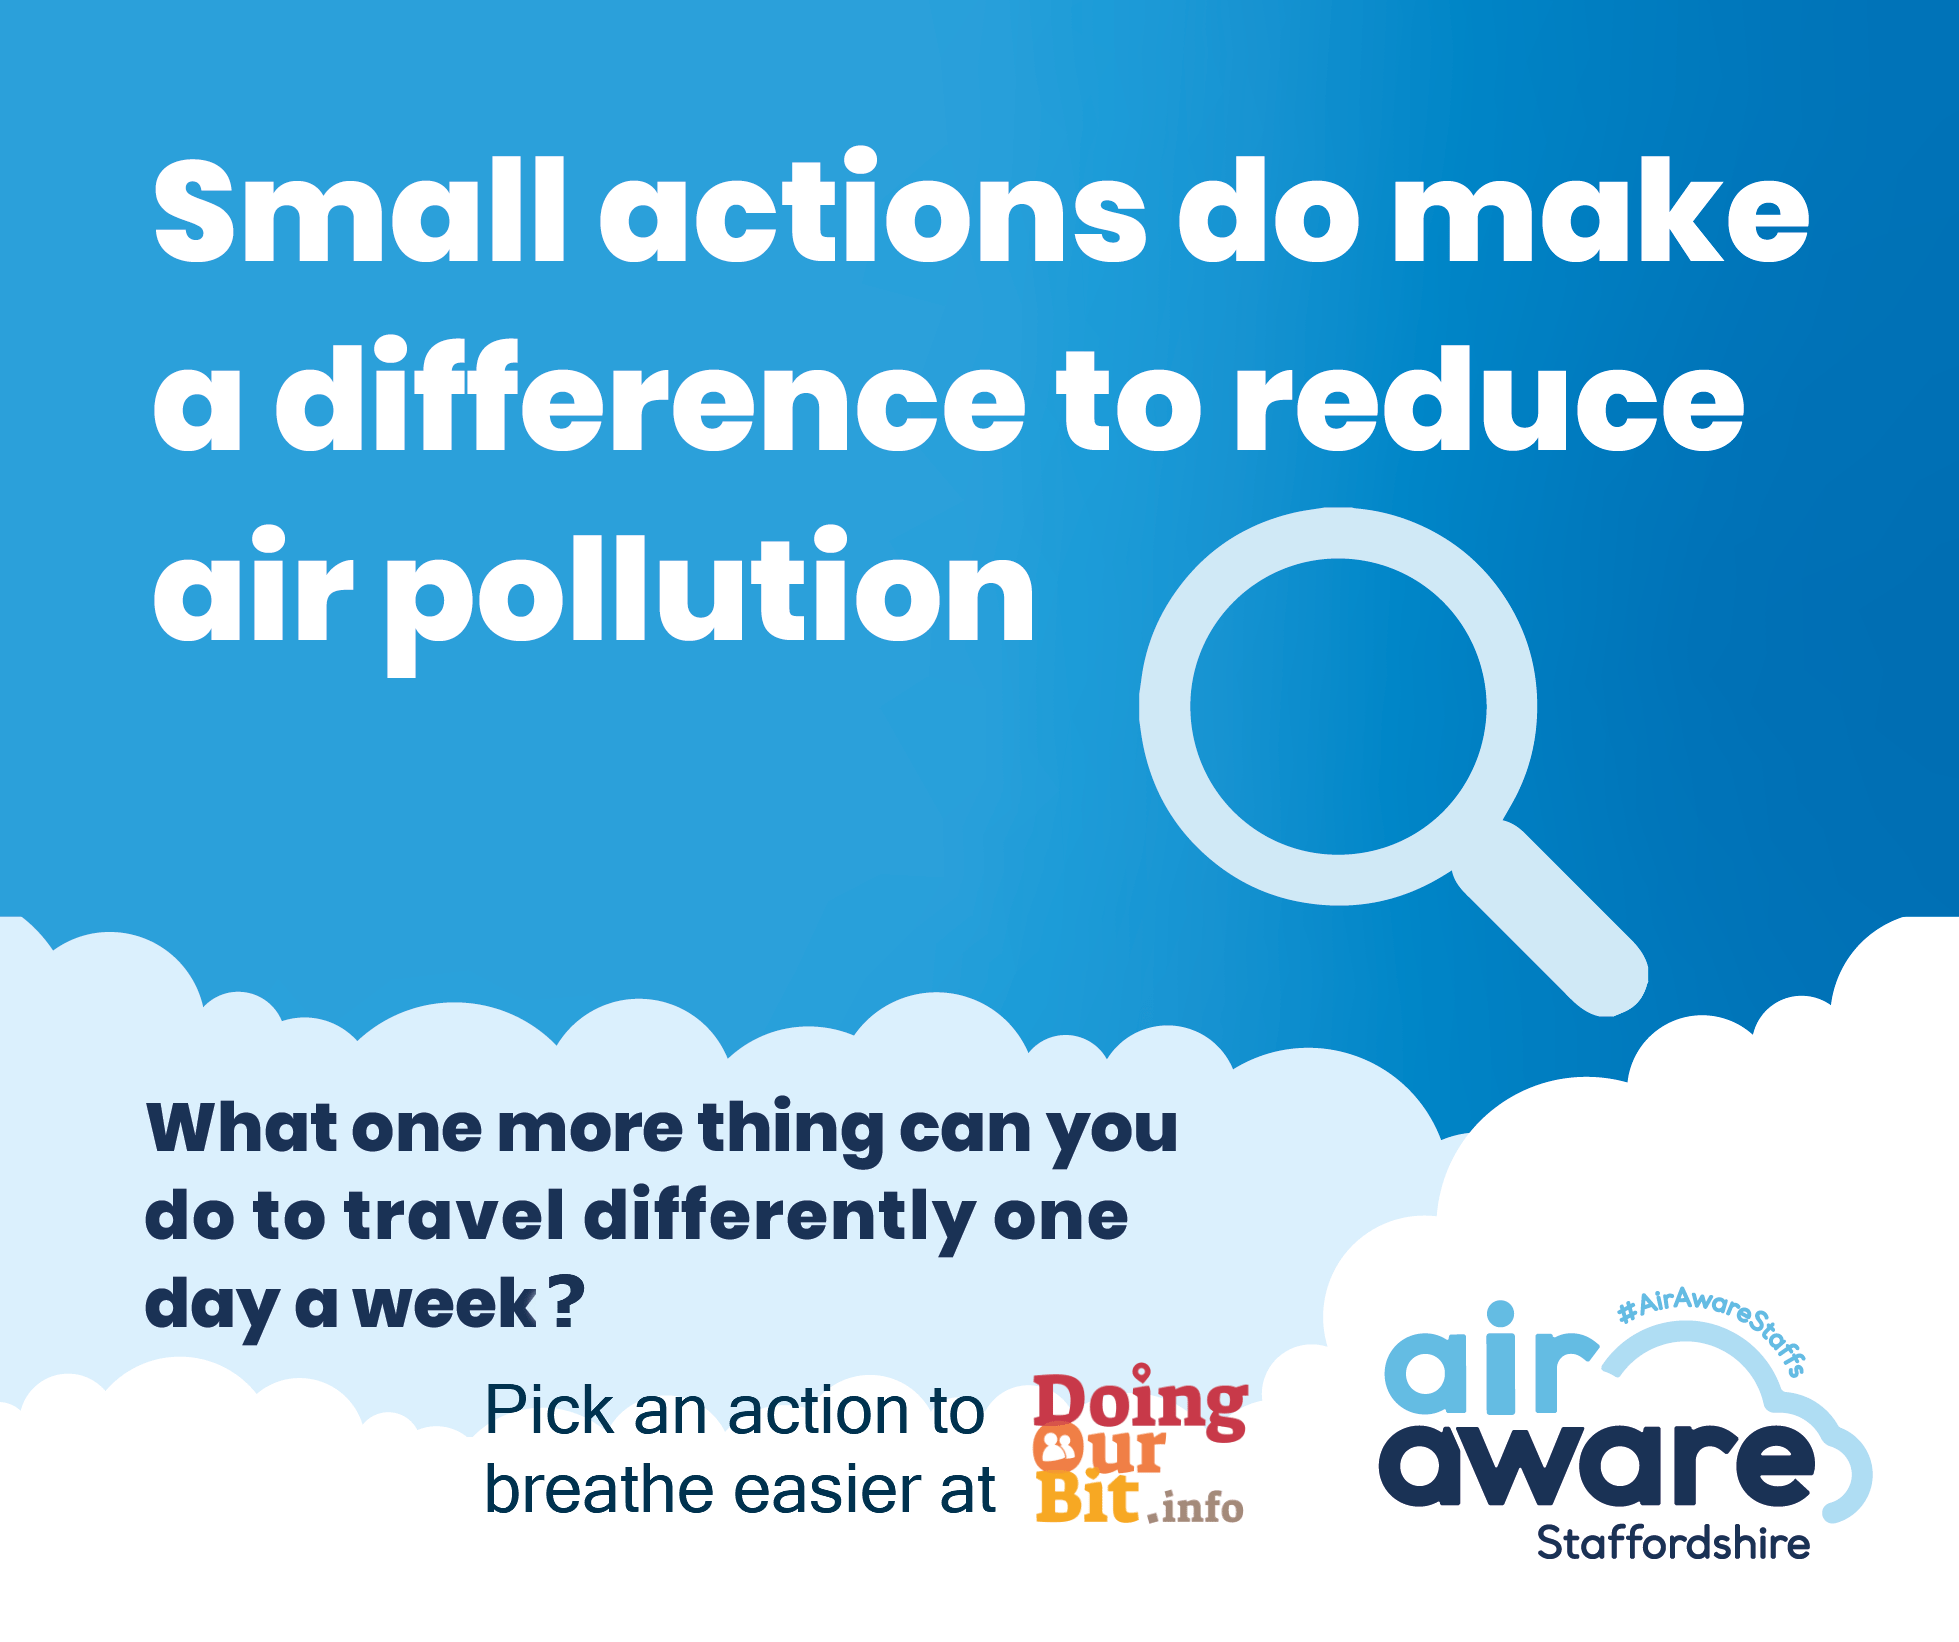 Staffordshire Air Aware Campaign